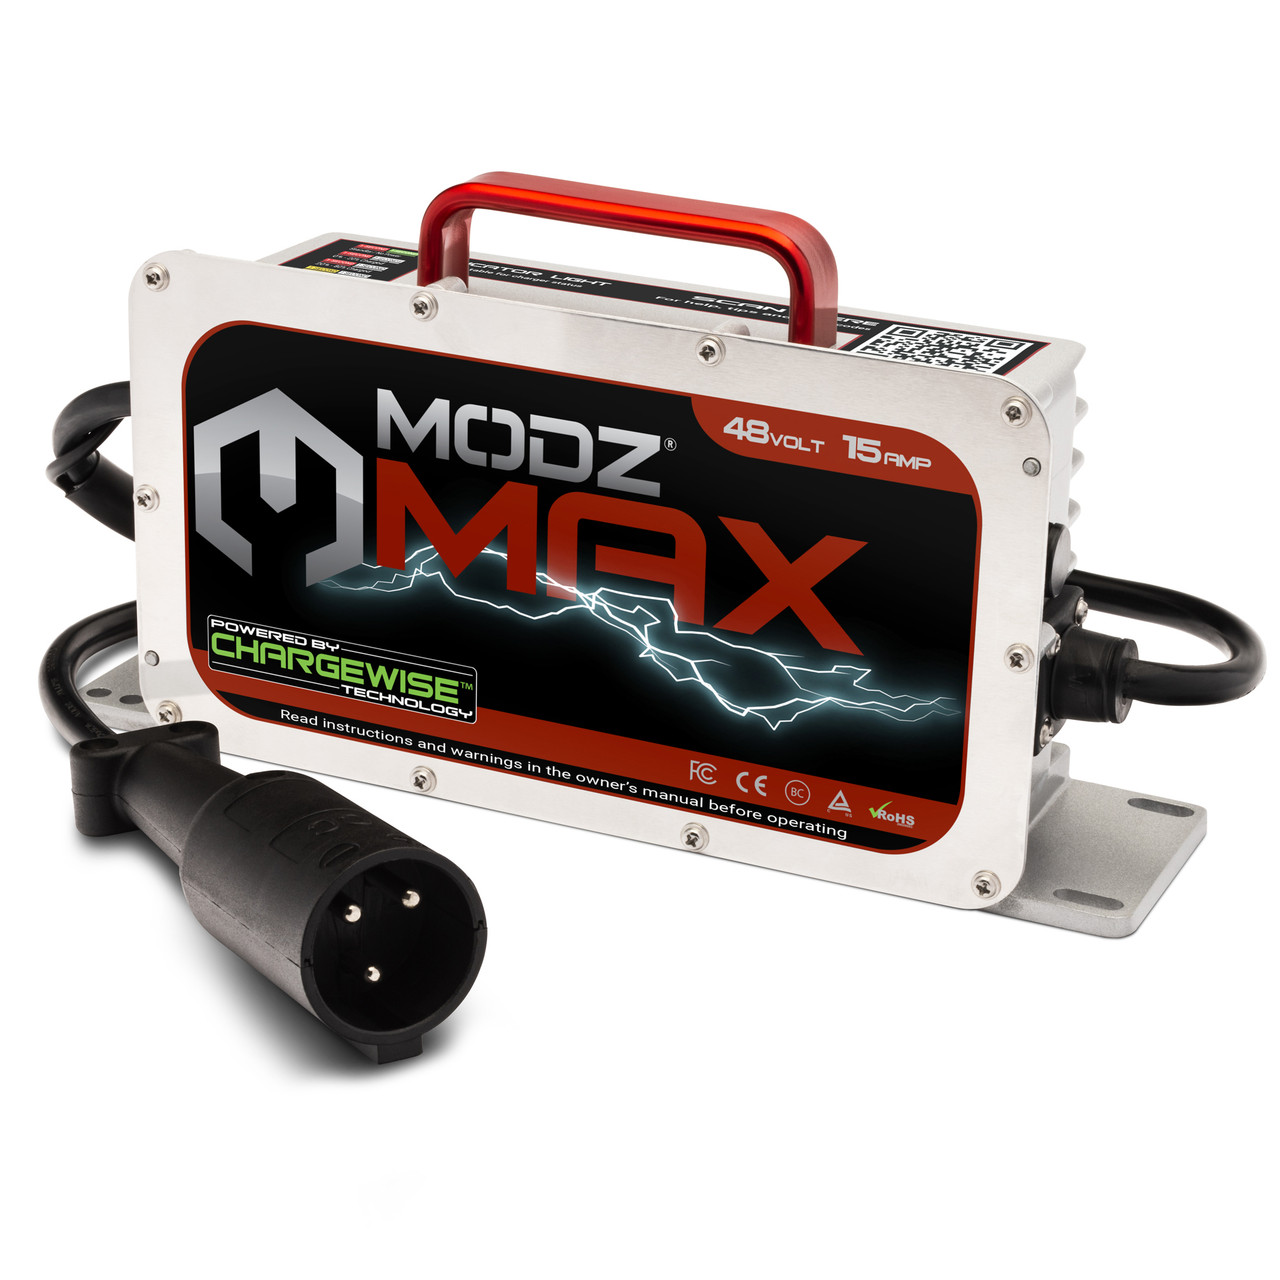 MODZ® MAX48 15 Amp Club Car Battery Charger for 48 Volt Golf Carts